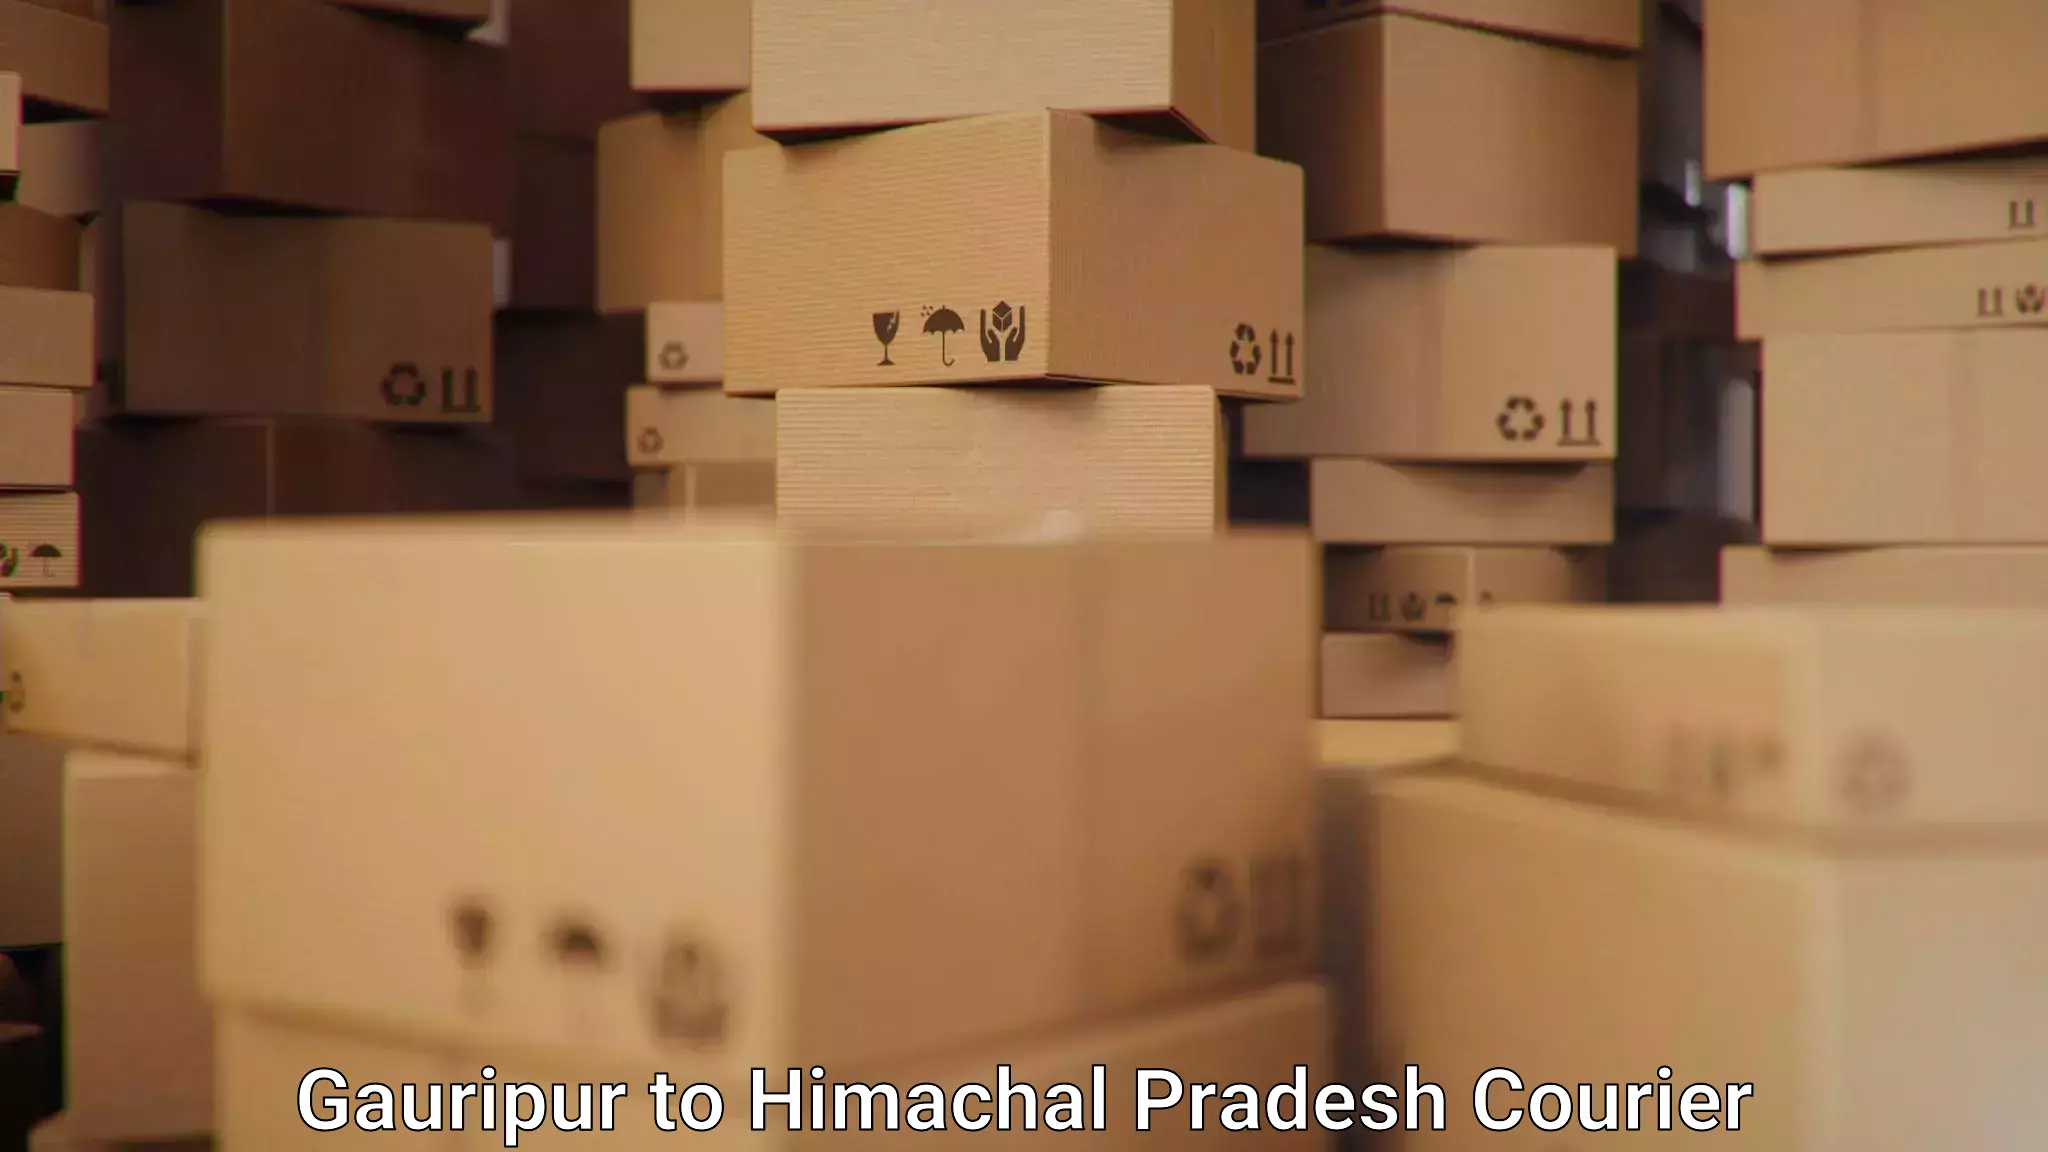 Package delivery network Gauripur to Himachal Pradesh